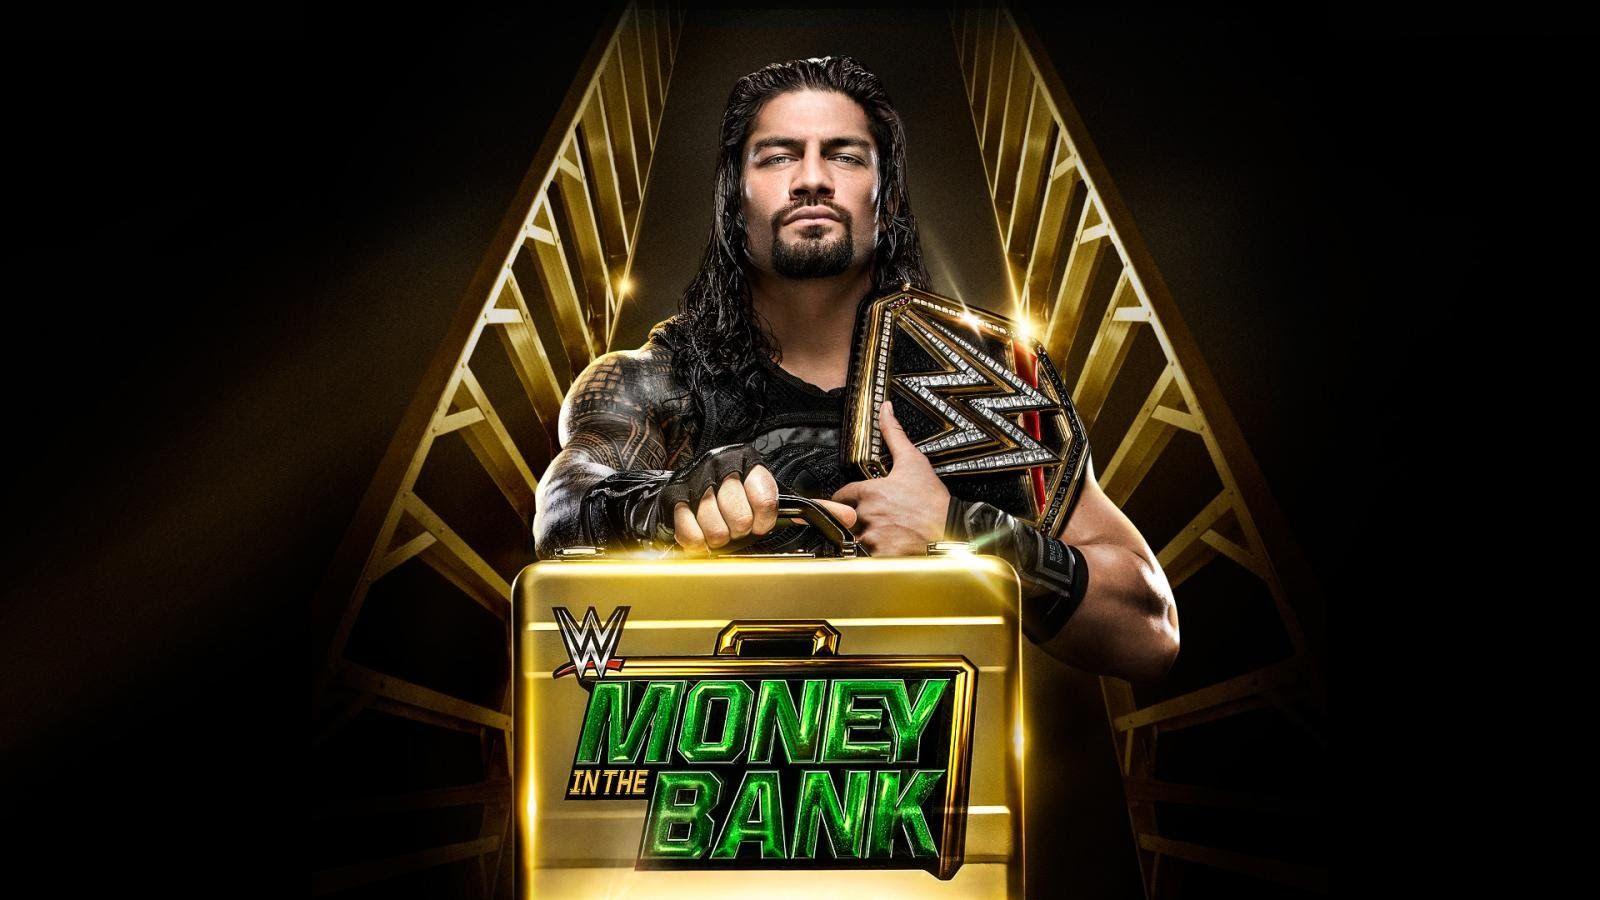 WWE Money in the Bank 2016! [WWE 2K16 Simulation] #MITB